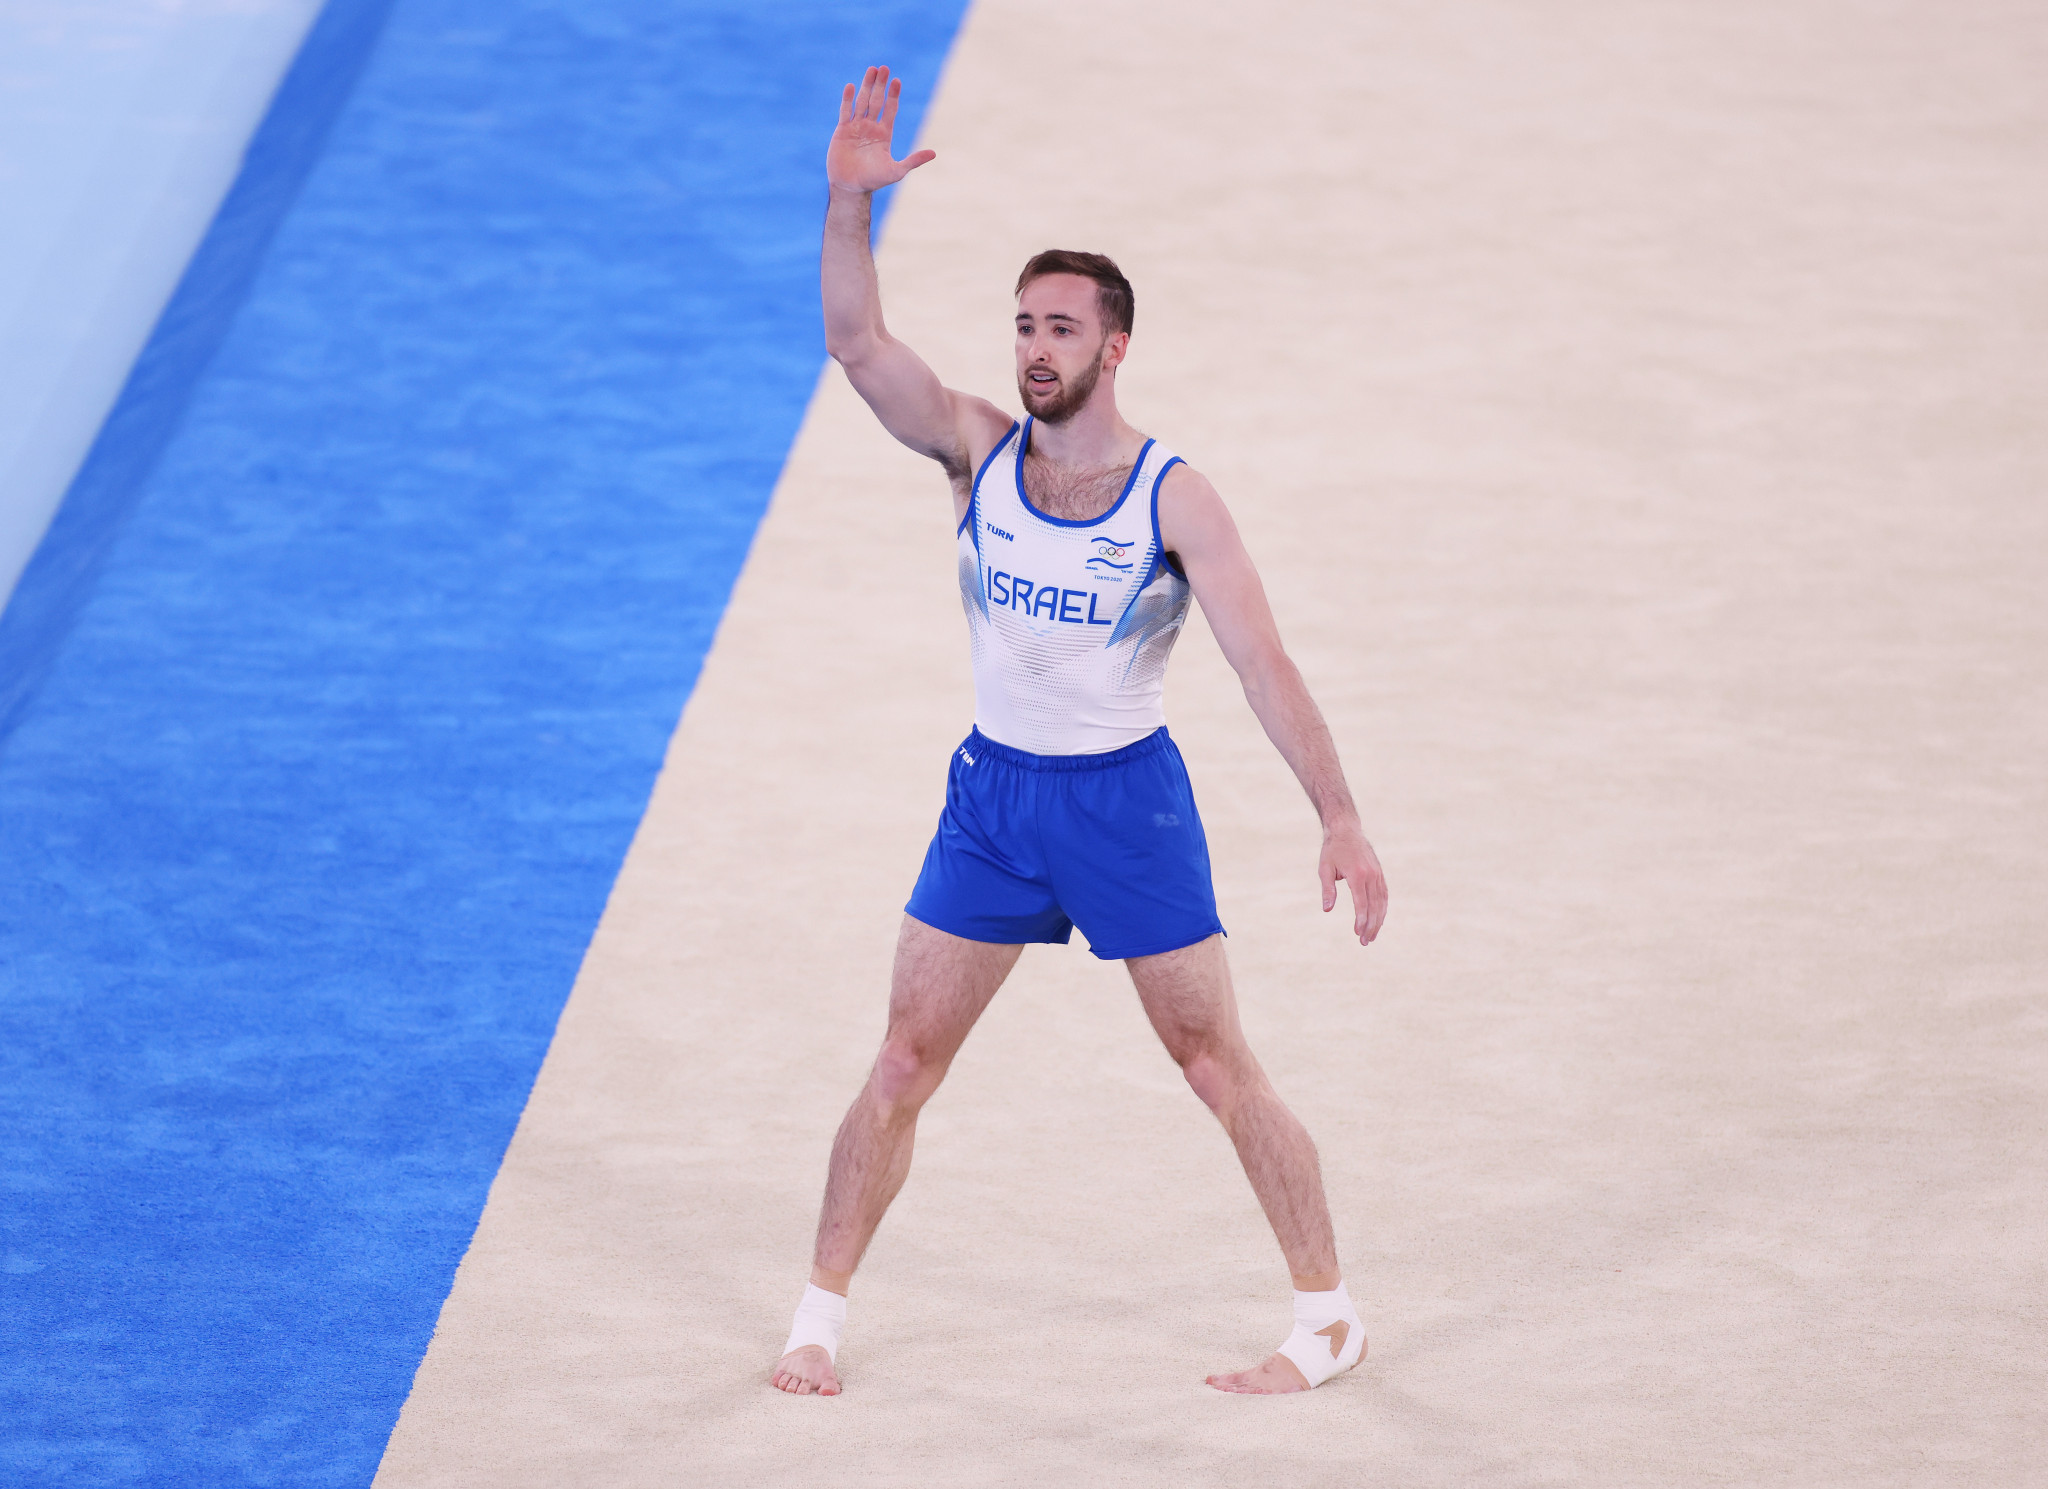 Artem Dolgopyat of Israel won the floor event at the Tokyo 2020 Olympics ©Getty Images